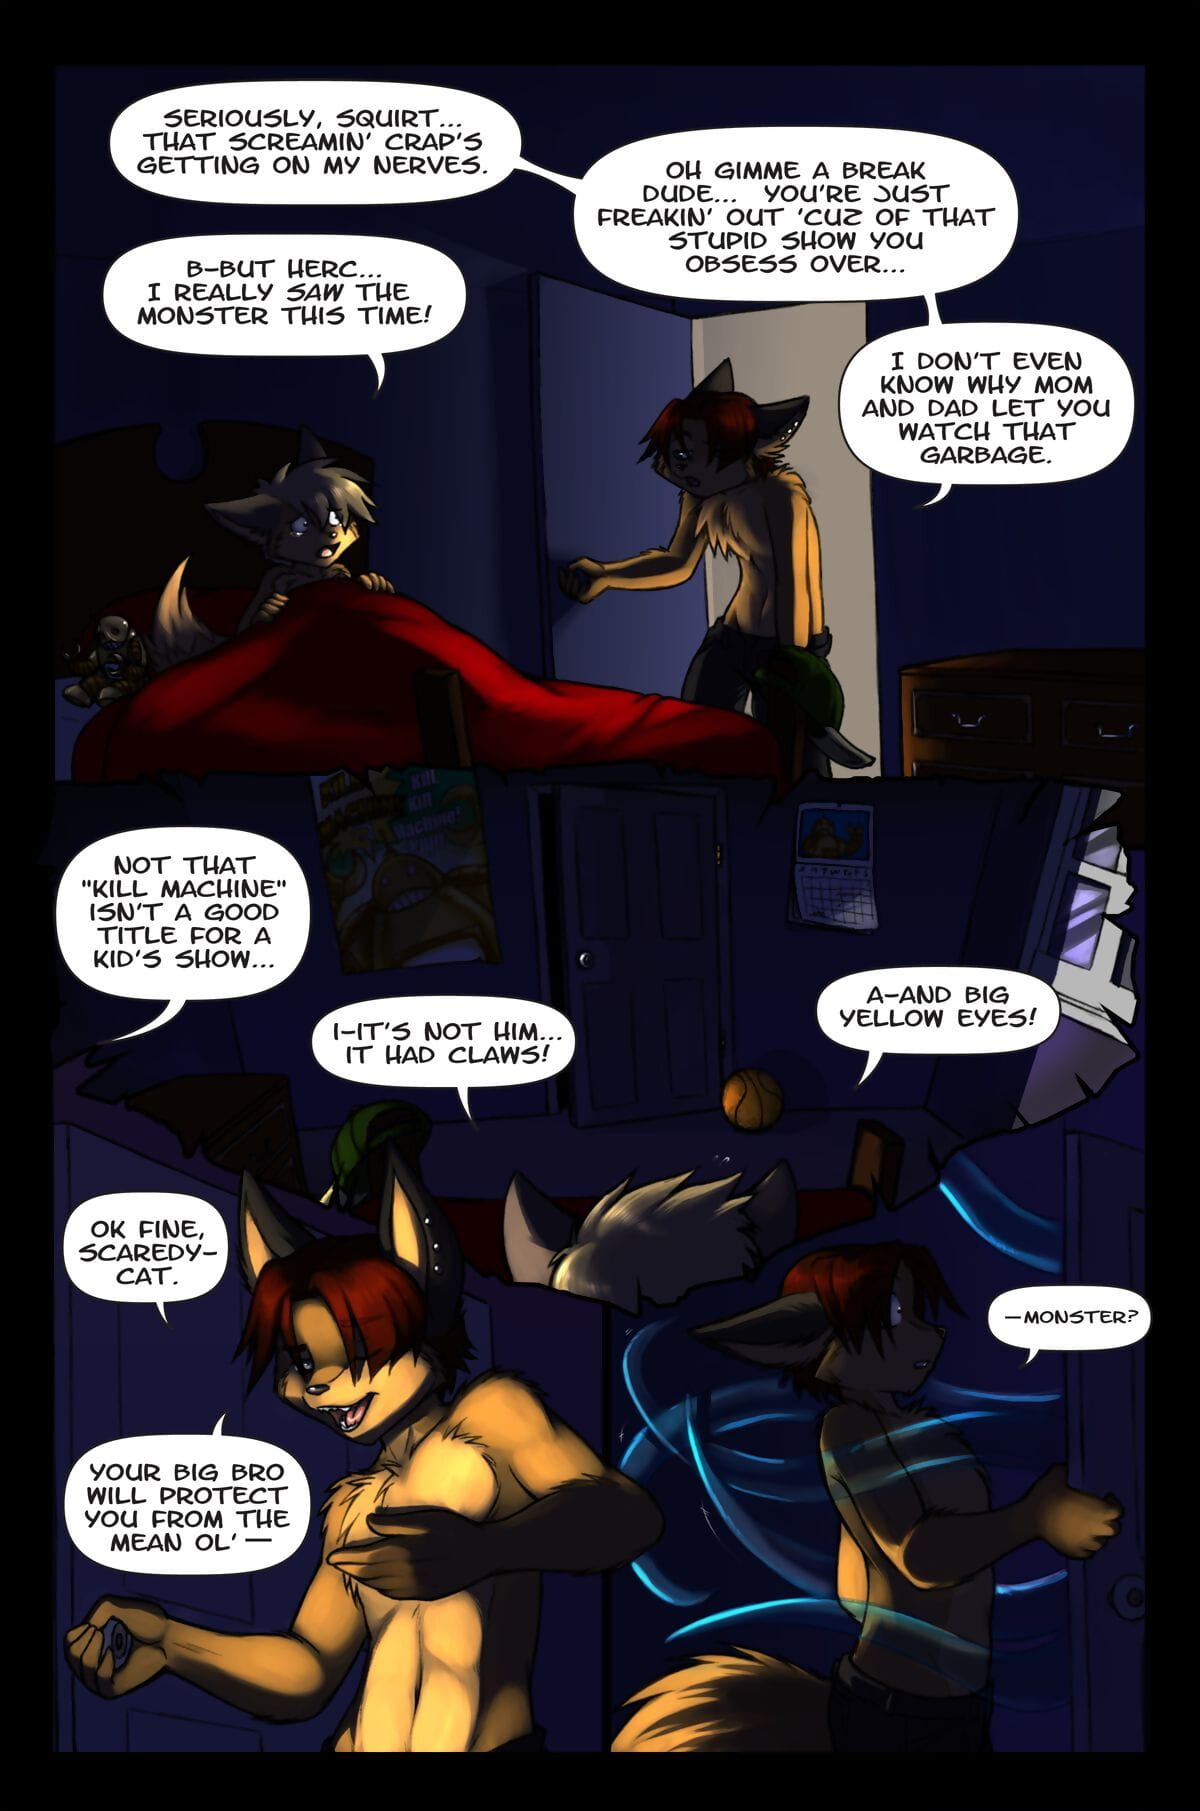 Bump In The Night page 1